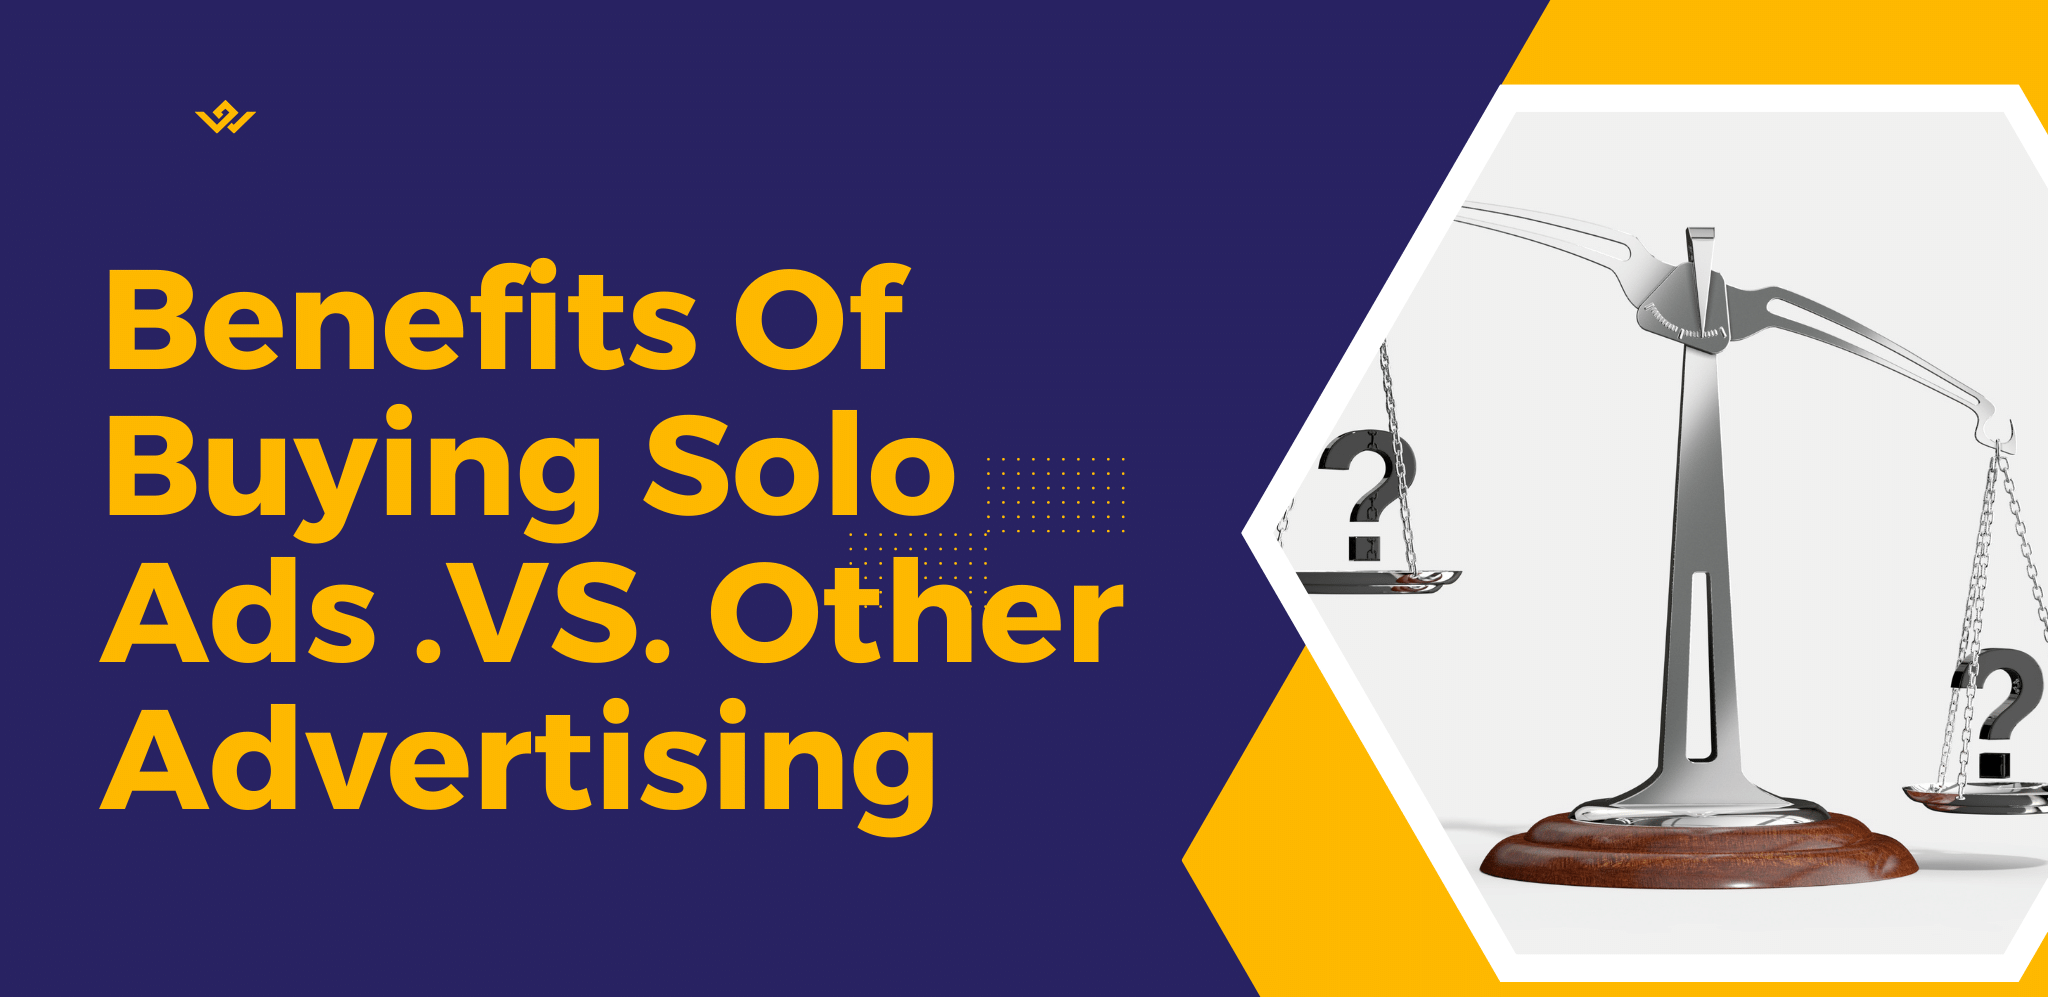 Benefits Of Buying Solo Ads .VS . Other Advertising